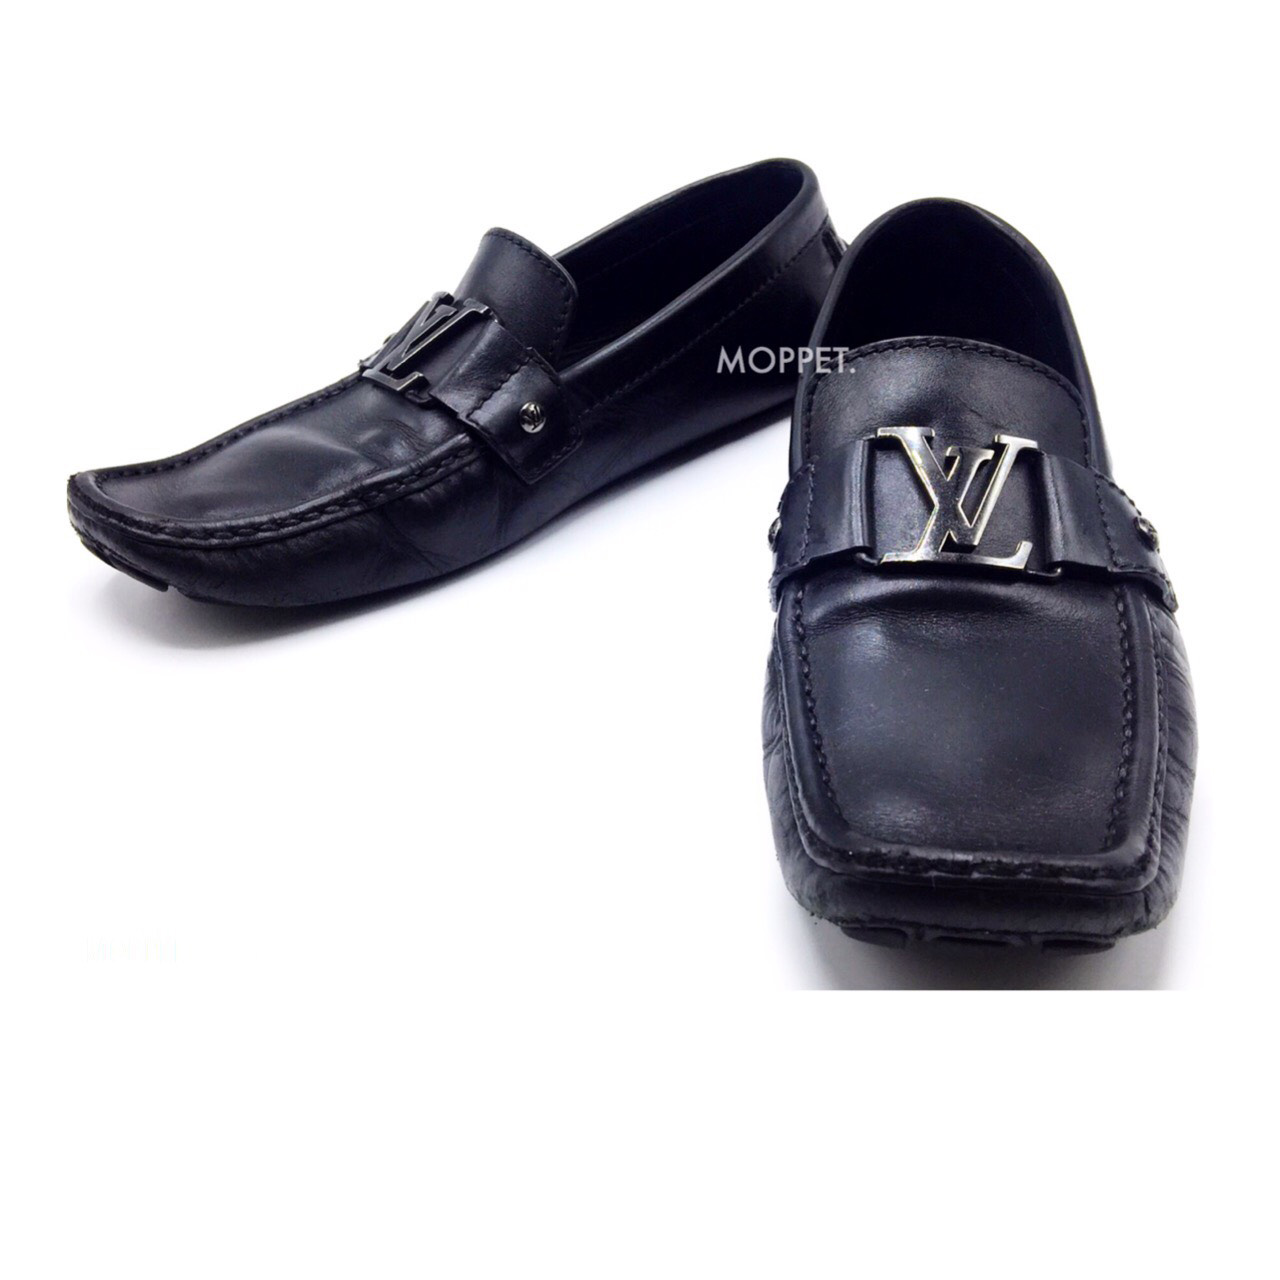 Used LV Monticarlo Size 8" in Black Leather